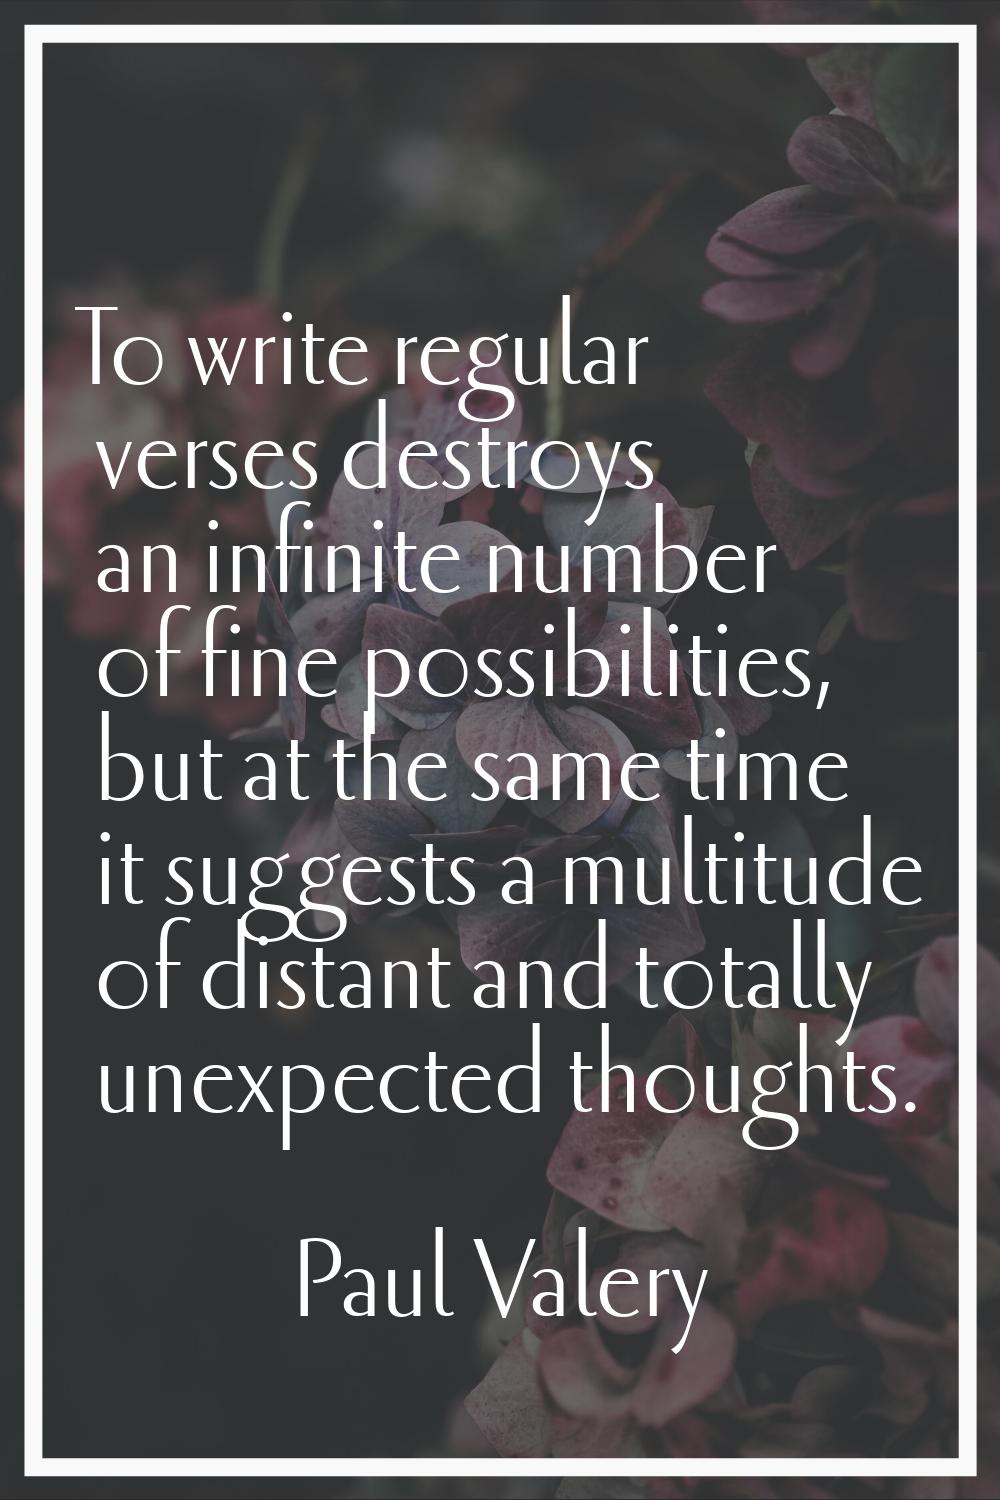 To write regular verses destroys an infinite number of fine possibilities, but at the same time it 